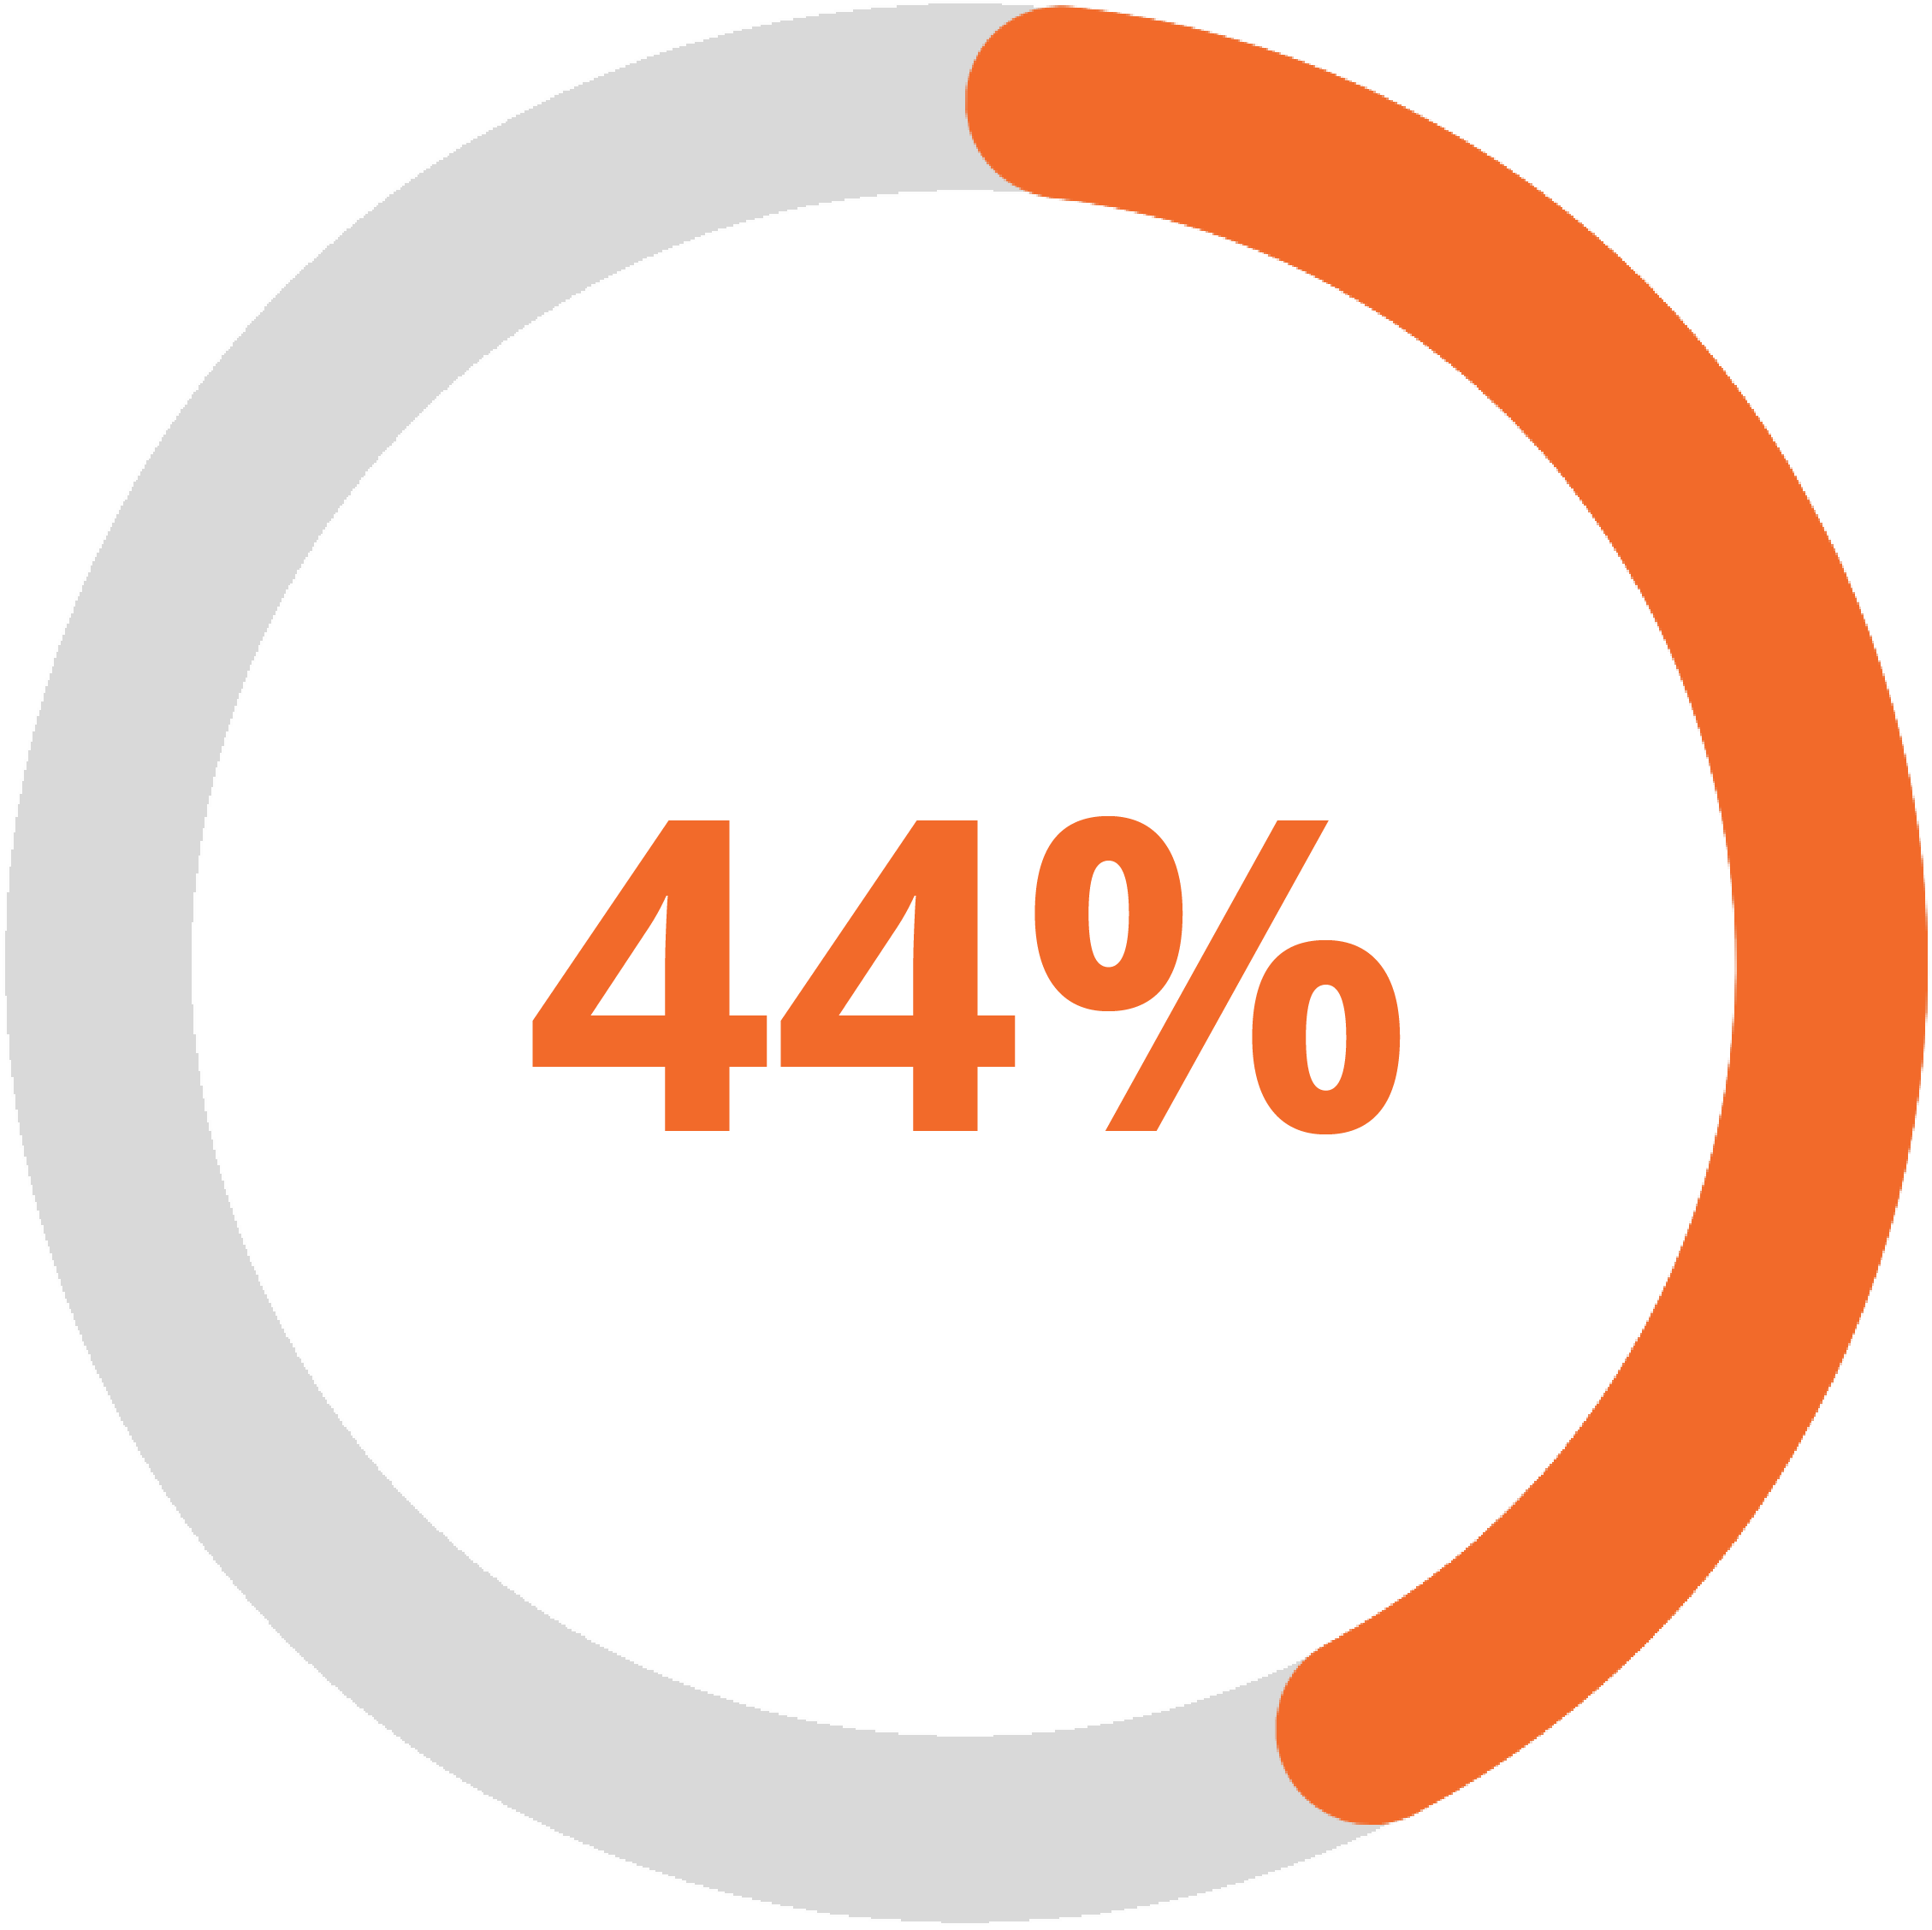 44% report that their conversion rate to closed-won business is higher